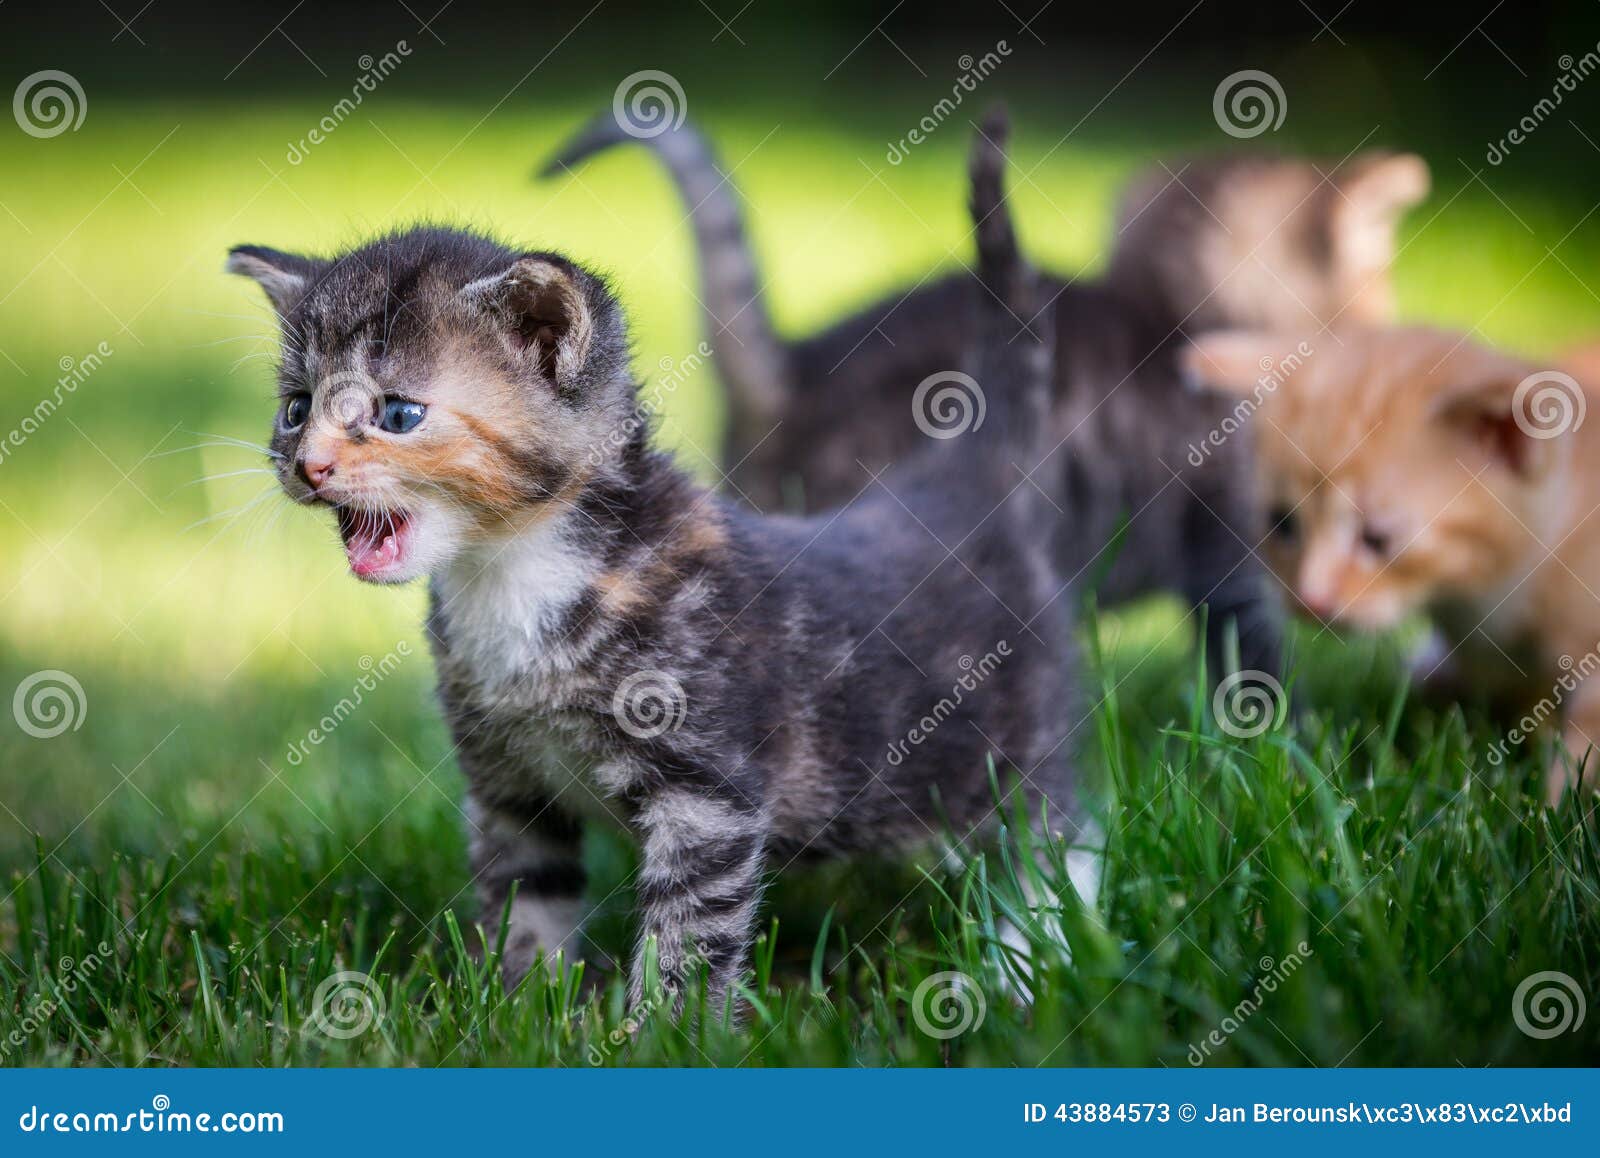 Adorable Kitten Looking And Angry, Made With Color Filter. Stock Photo,  Picture and Royalty Free Image. Image 87739544.